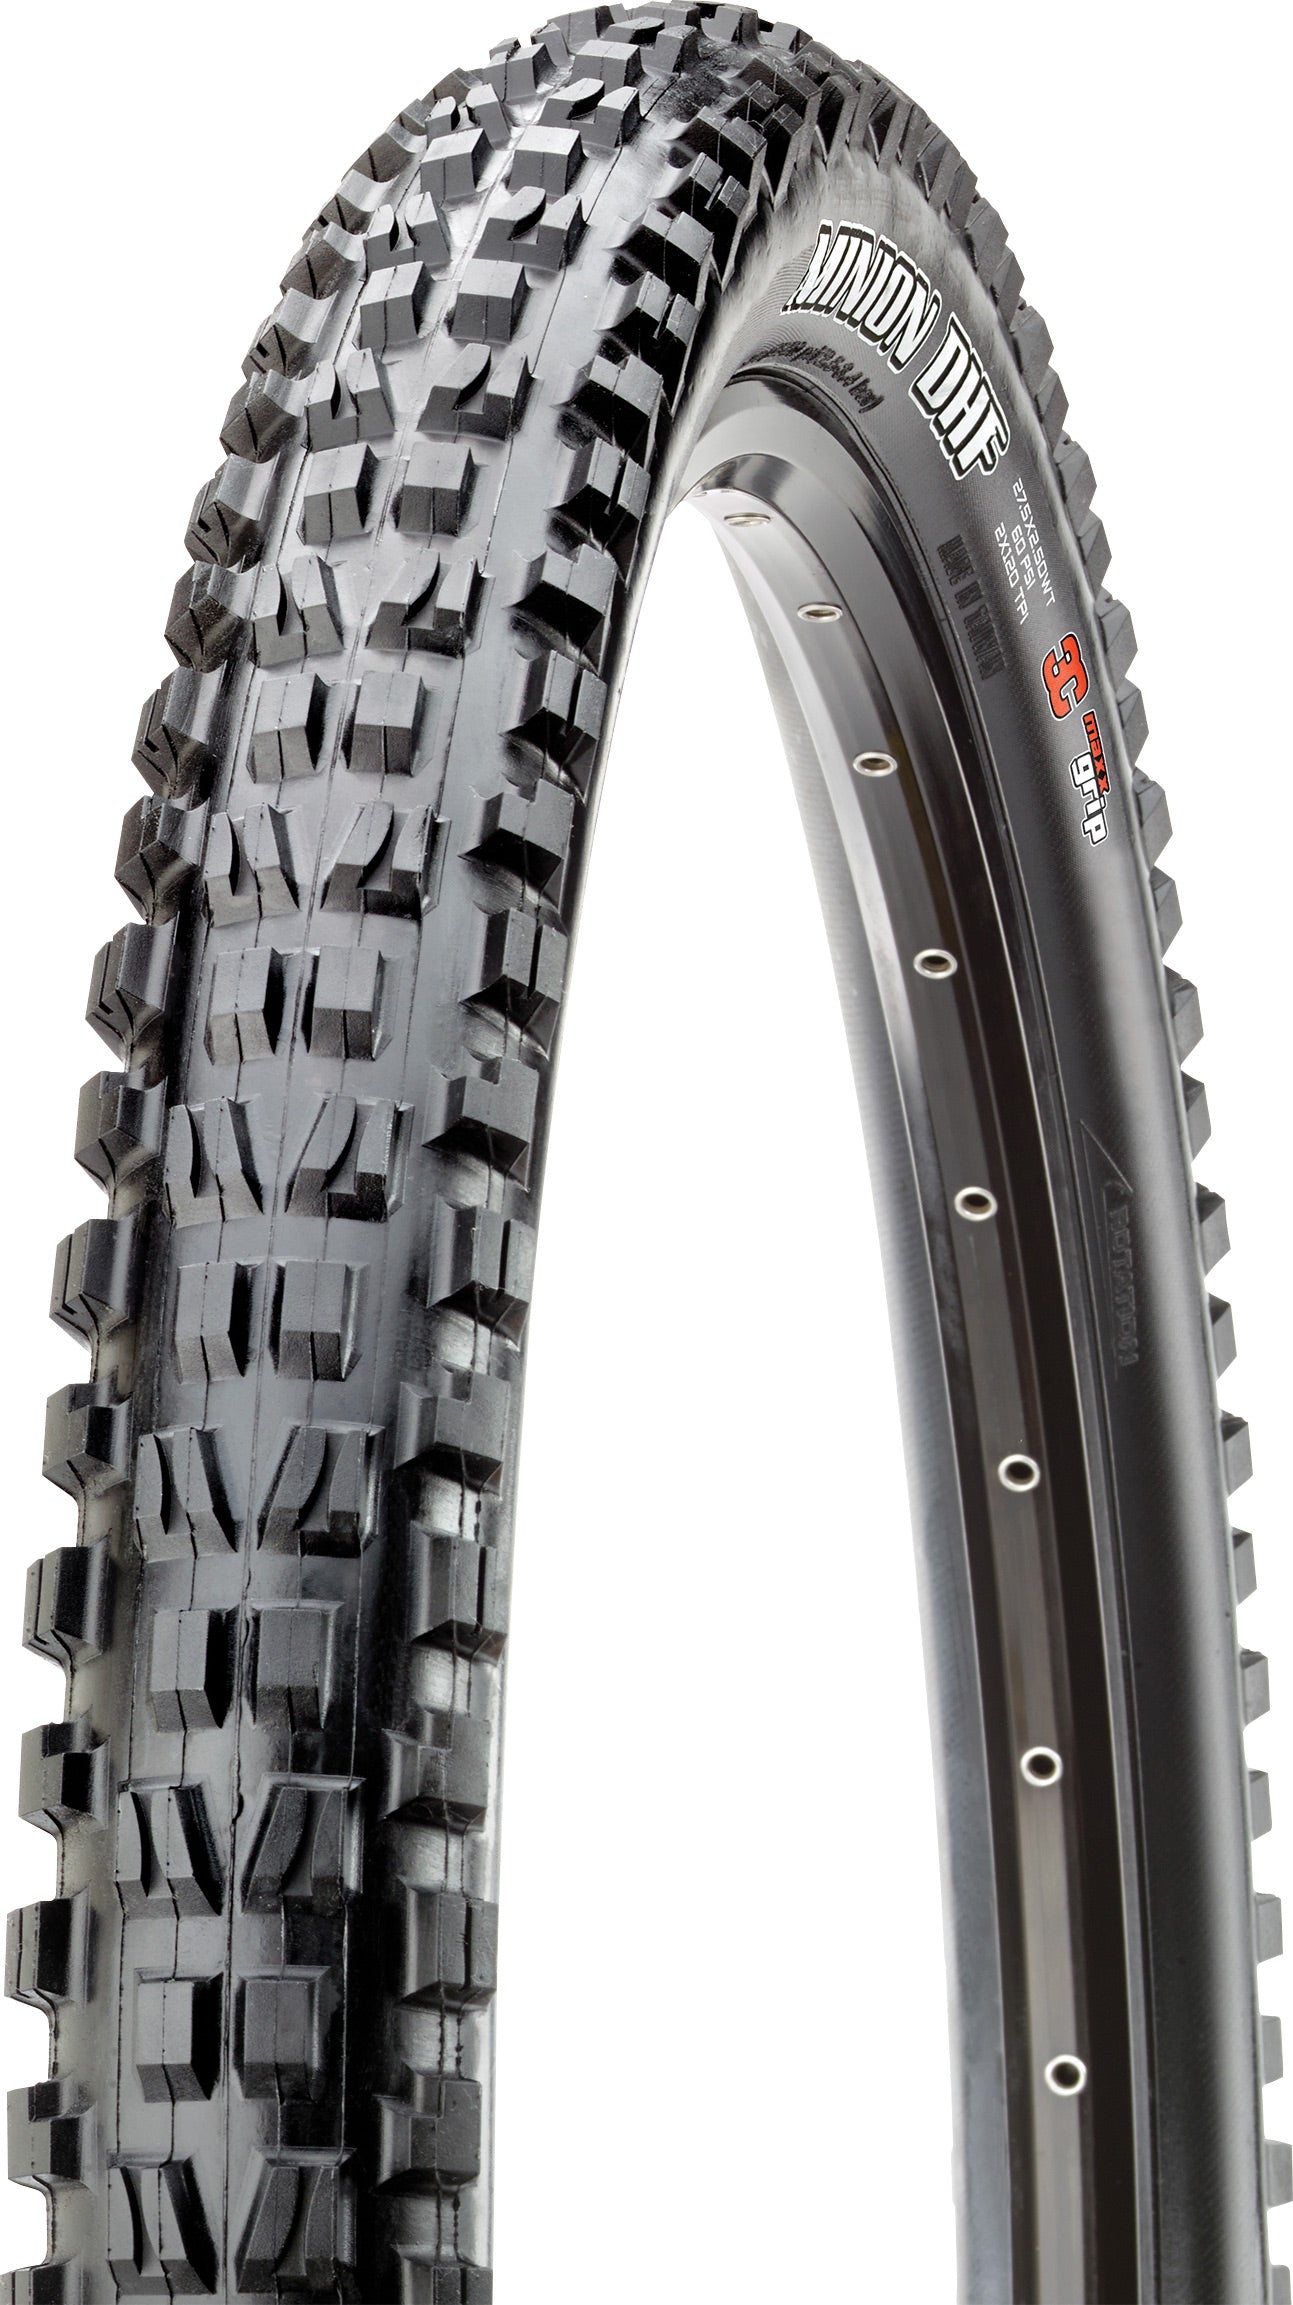 Maxxis Minion DHF DH 27.5 x 2.50 60 TPI Wire Single Compound tyre